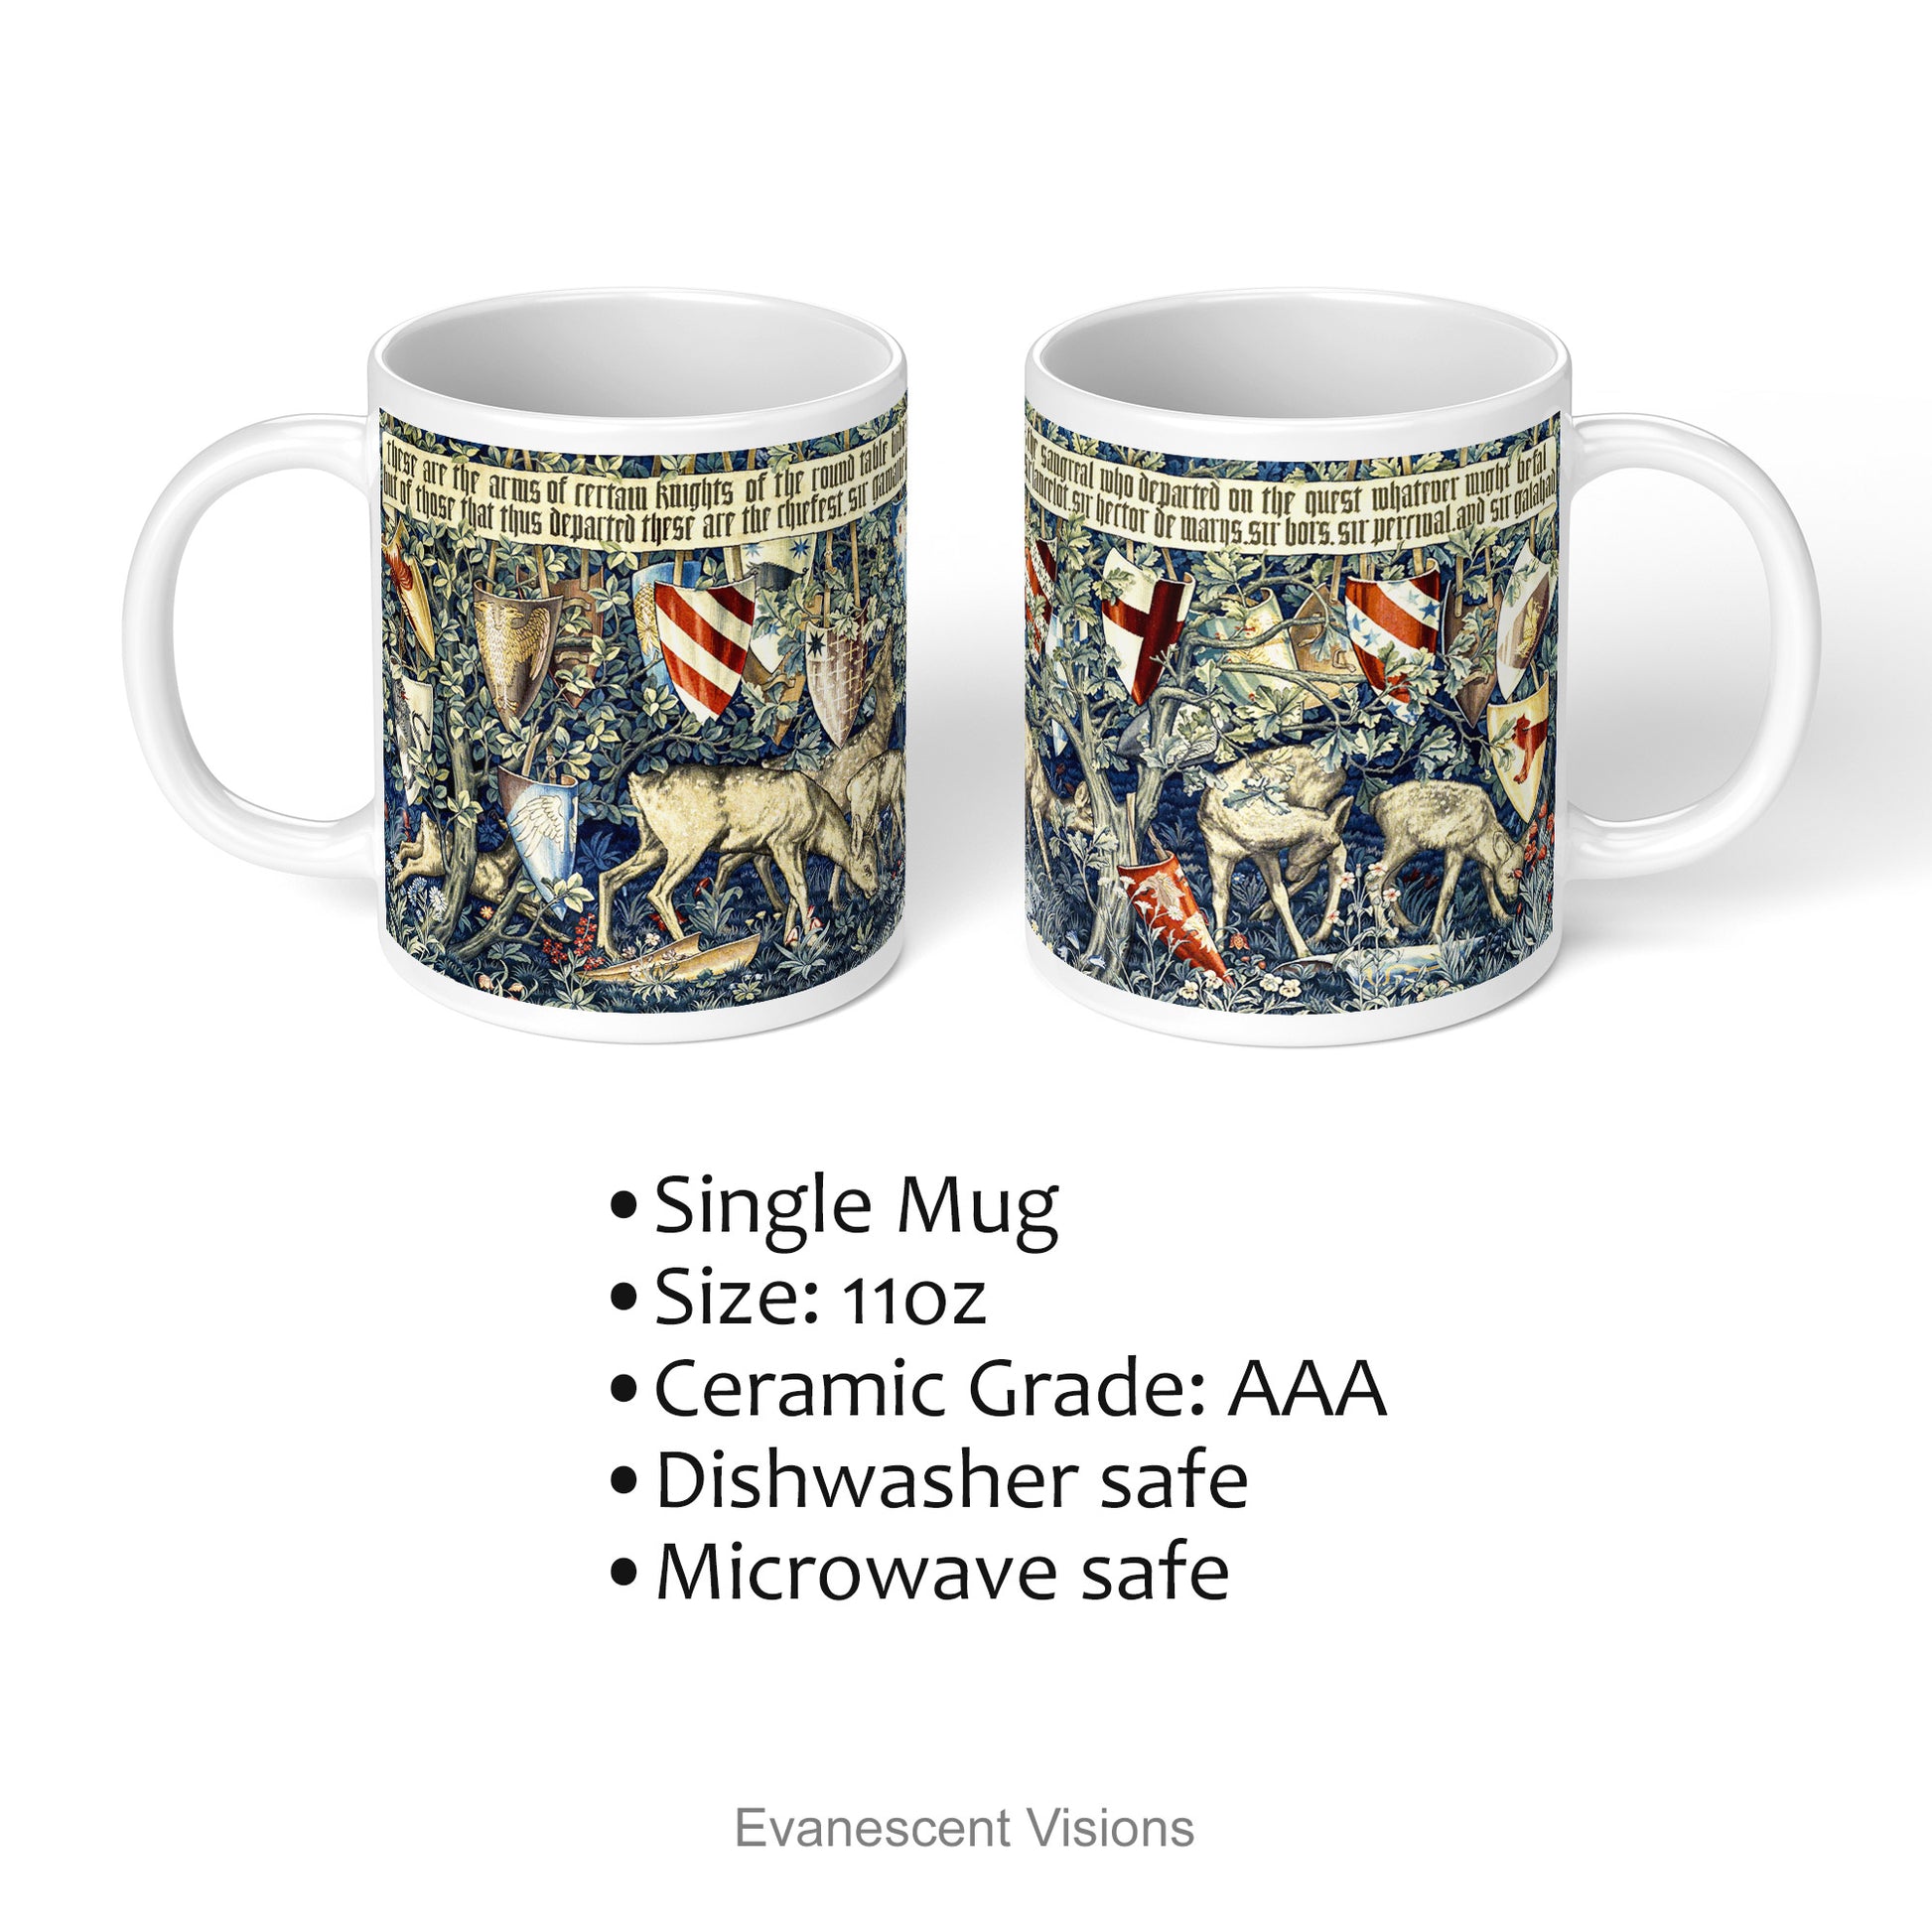 left and right views of the William Morris King arthur Vedure Panel Art Mug with product details